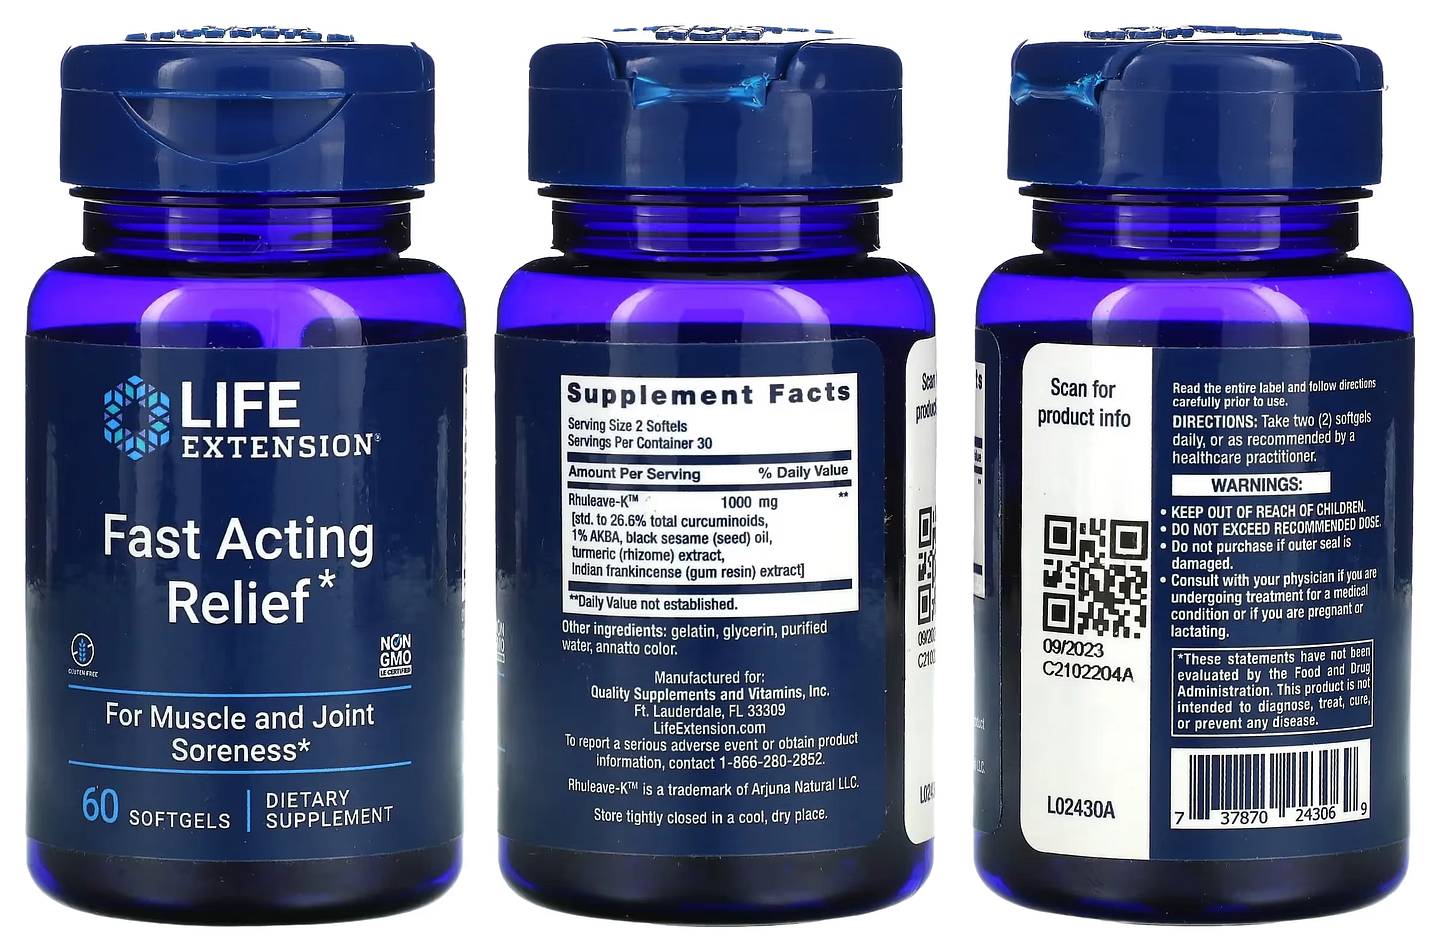 Life Extension, Fast Acting Relief packaging